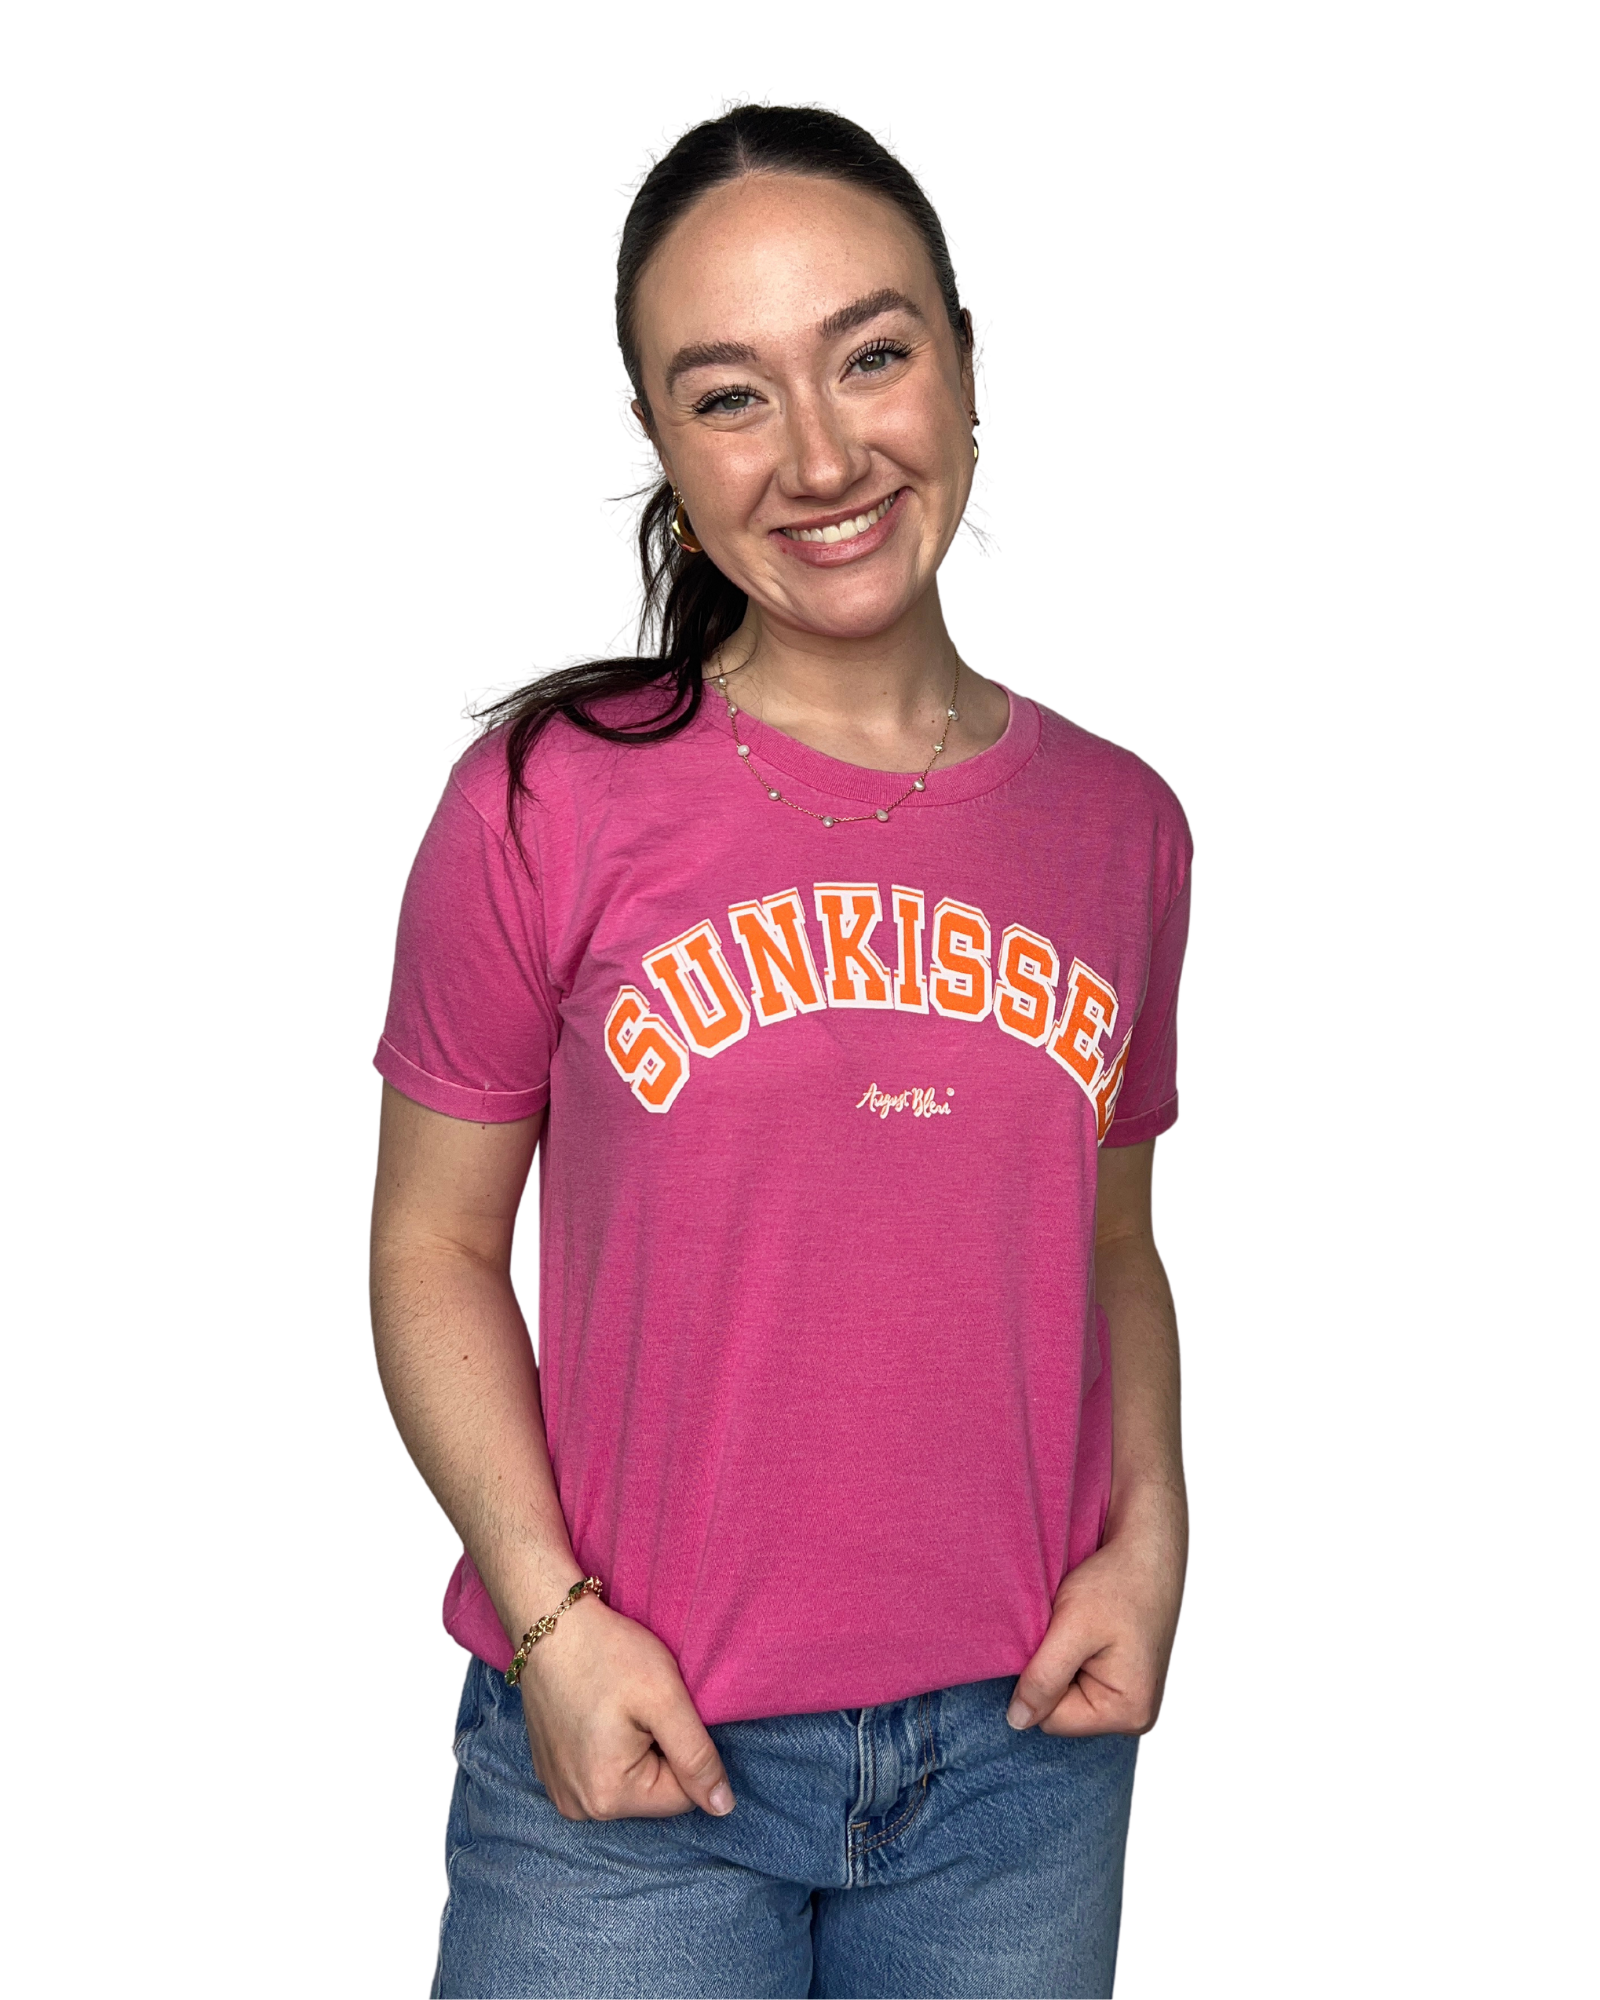 Sunkissed Electric Pink Tee